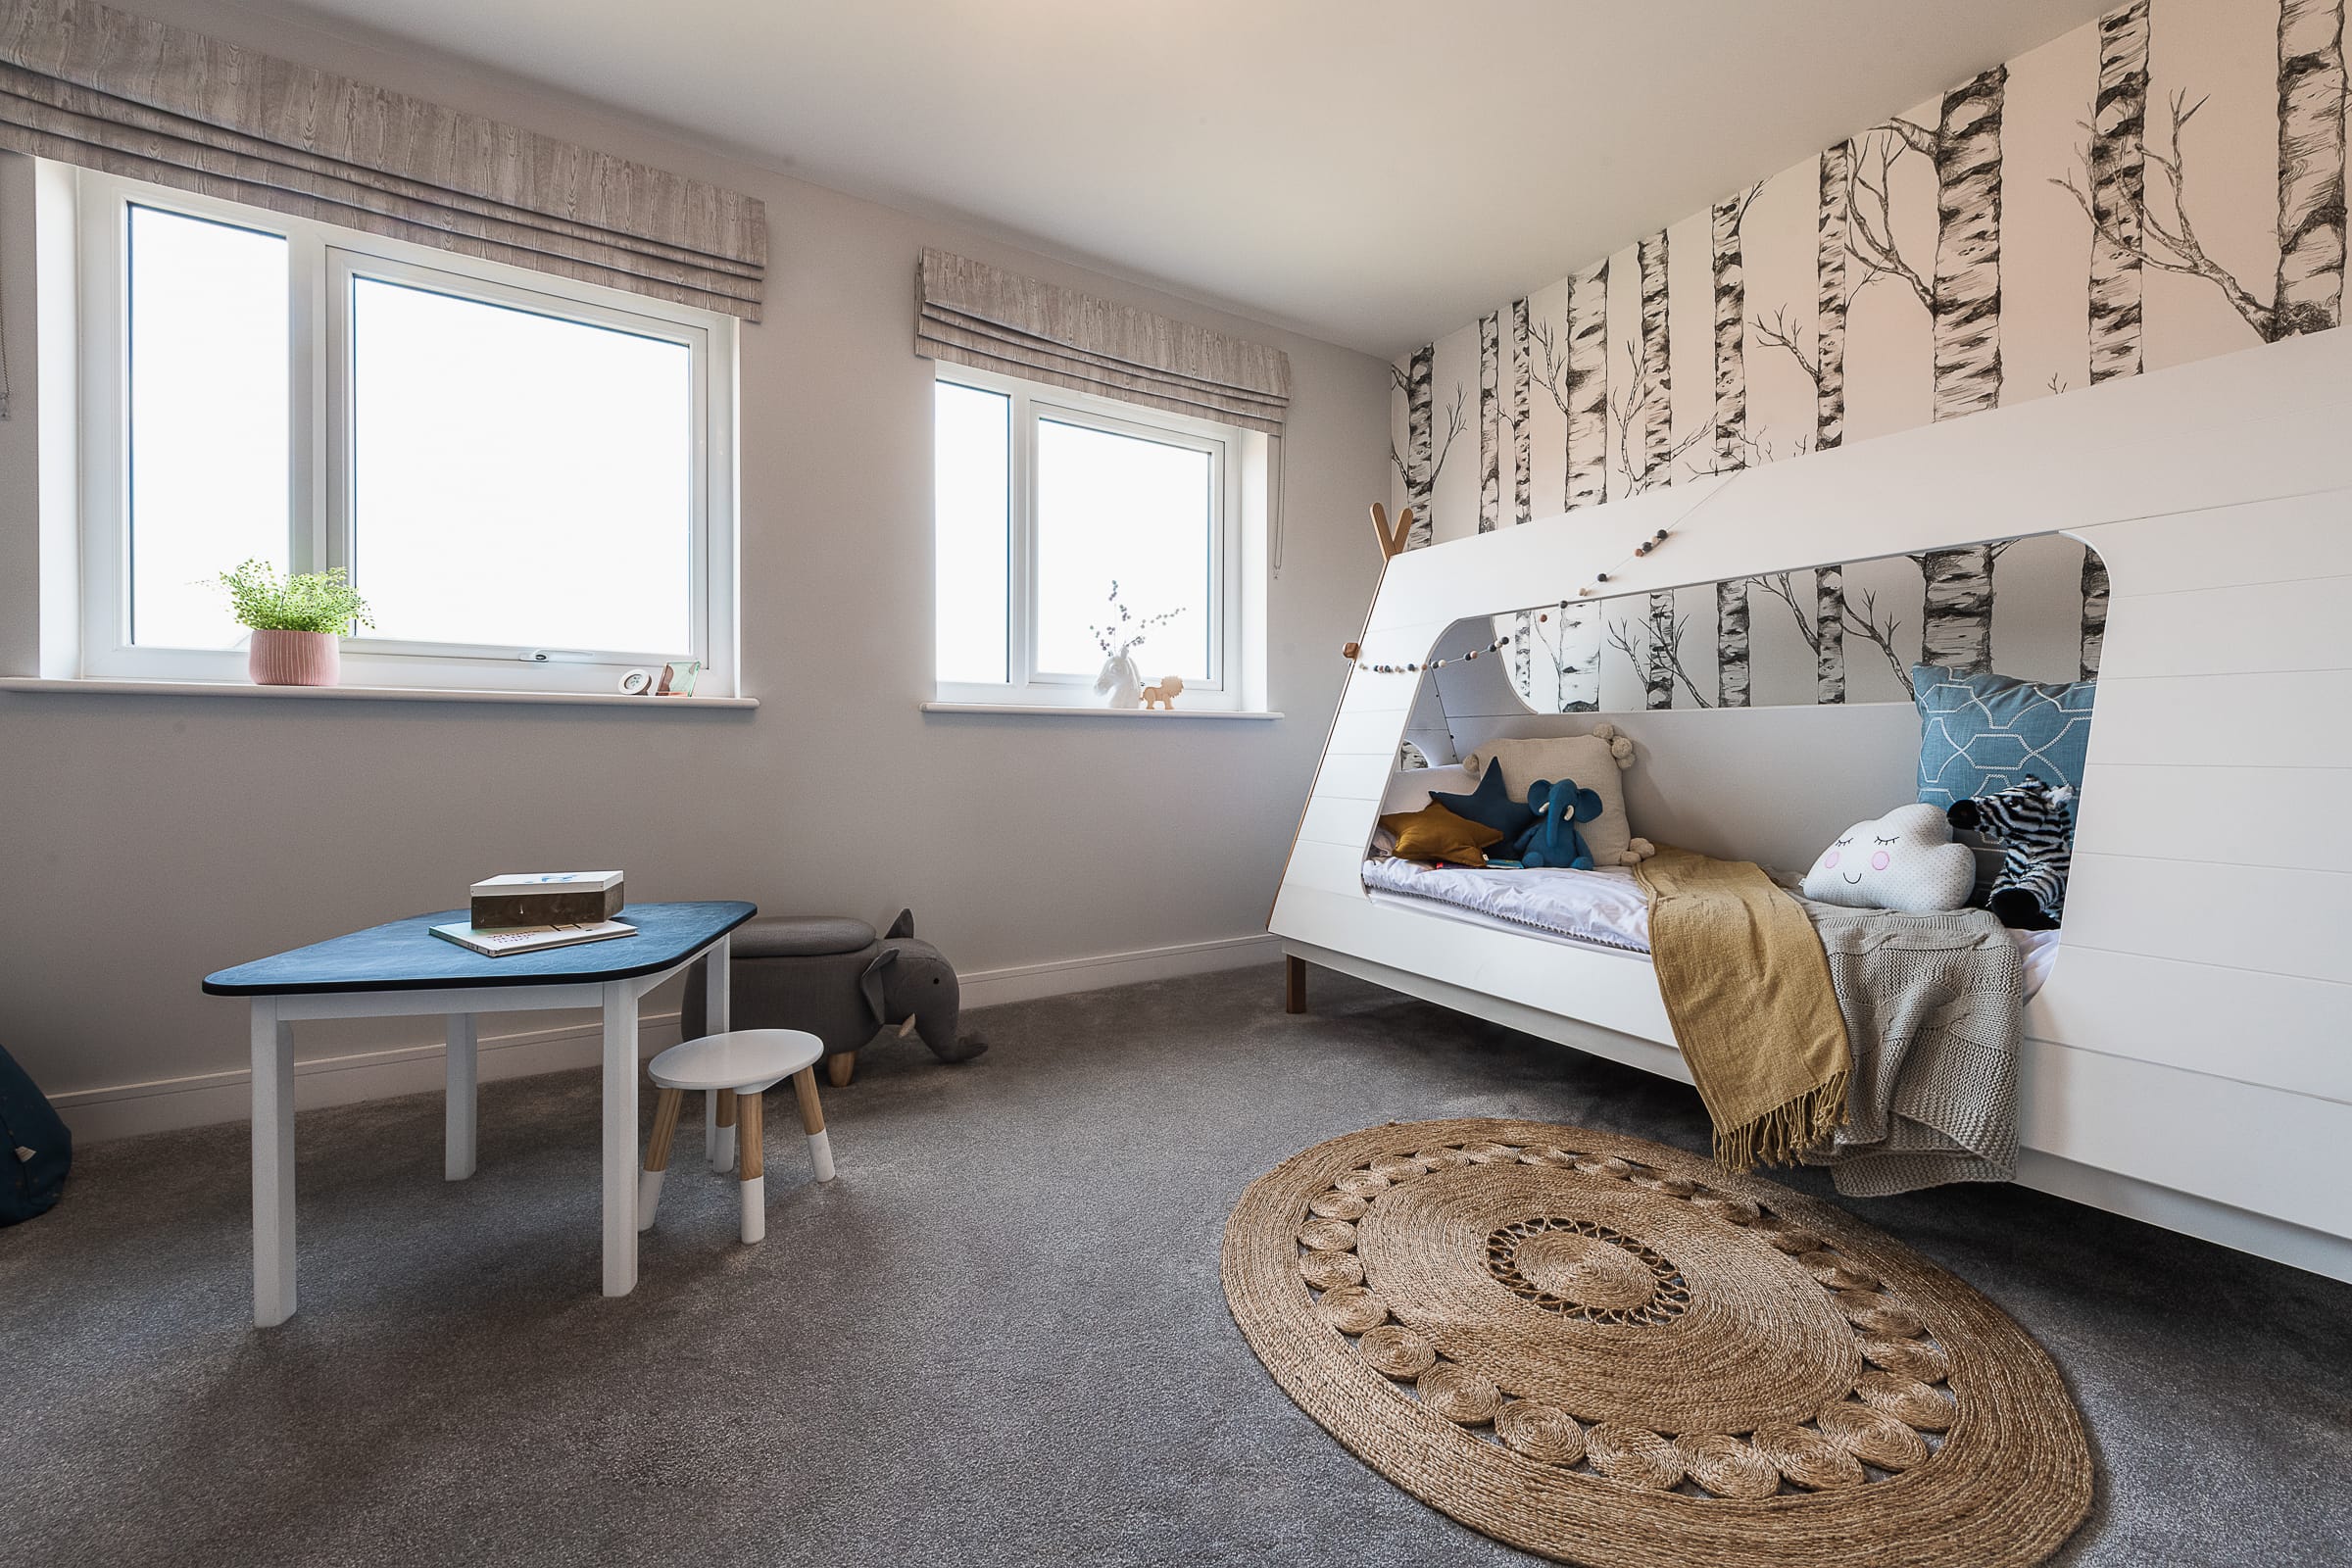 Interior show home photography of L&Q's part exchange properties at Saxon Reach - Shared Ownership homes available on Share to Buy!